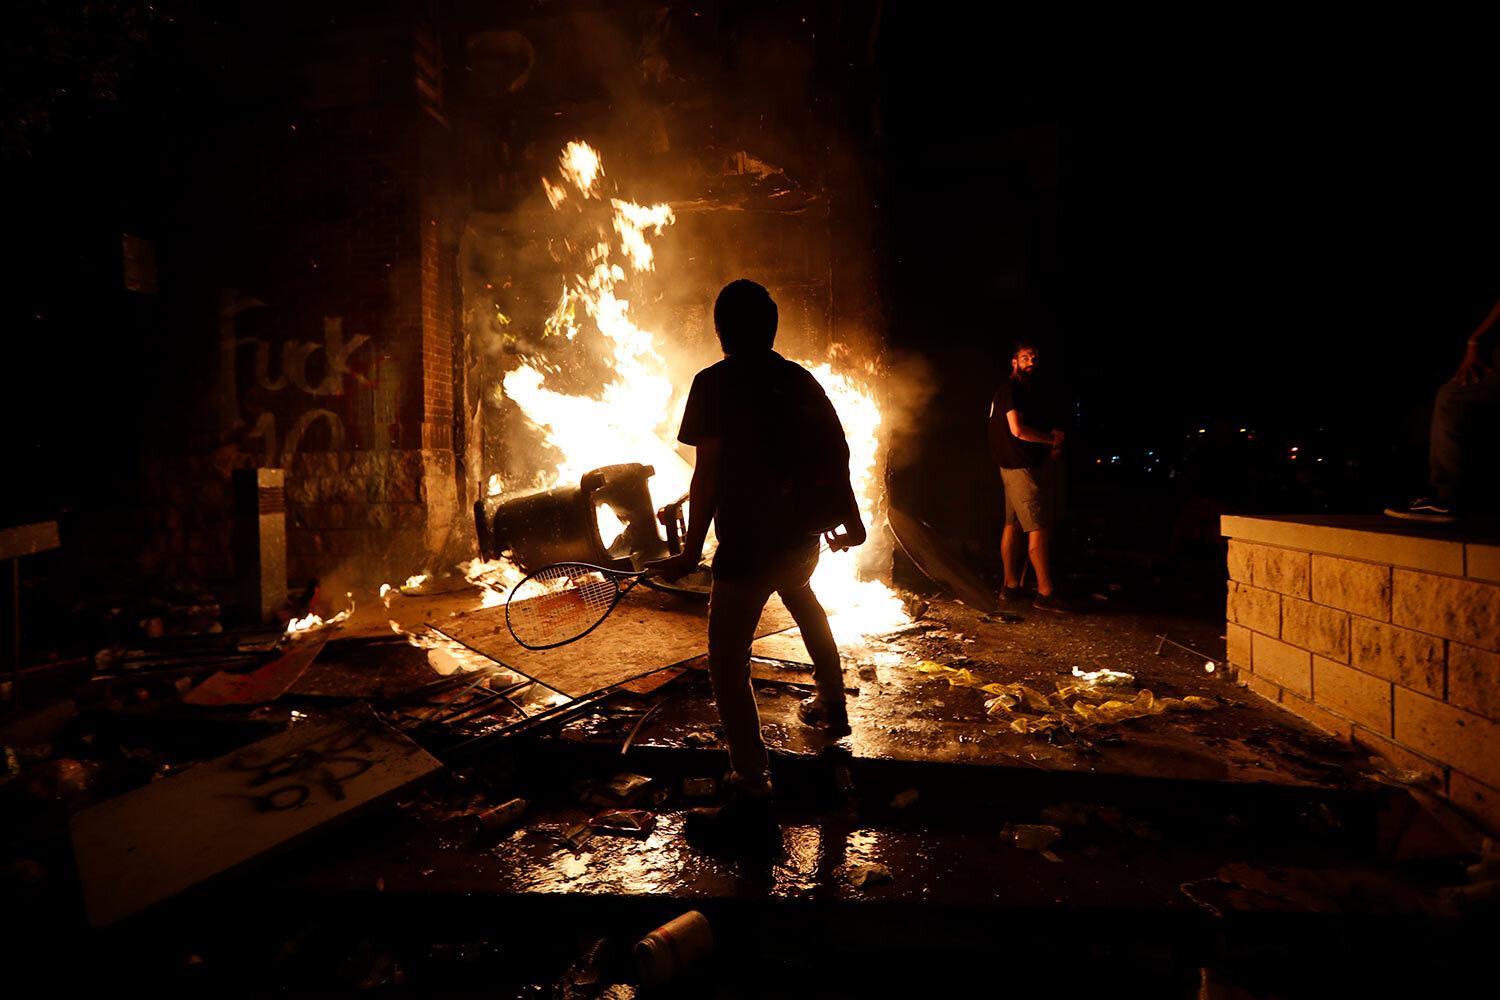  EDS NOTE: OBSCENITY - Protesters add fuel to a fire at the Minneapolis police 3rd Precinct building Thursday, May 28, 2020, in Minneapolis. Violent protests over the death of George Floyd, a black man who died in police custody Monday, broke out in 